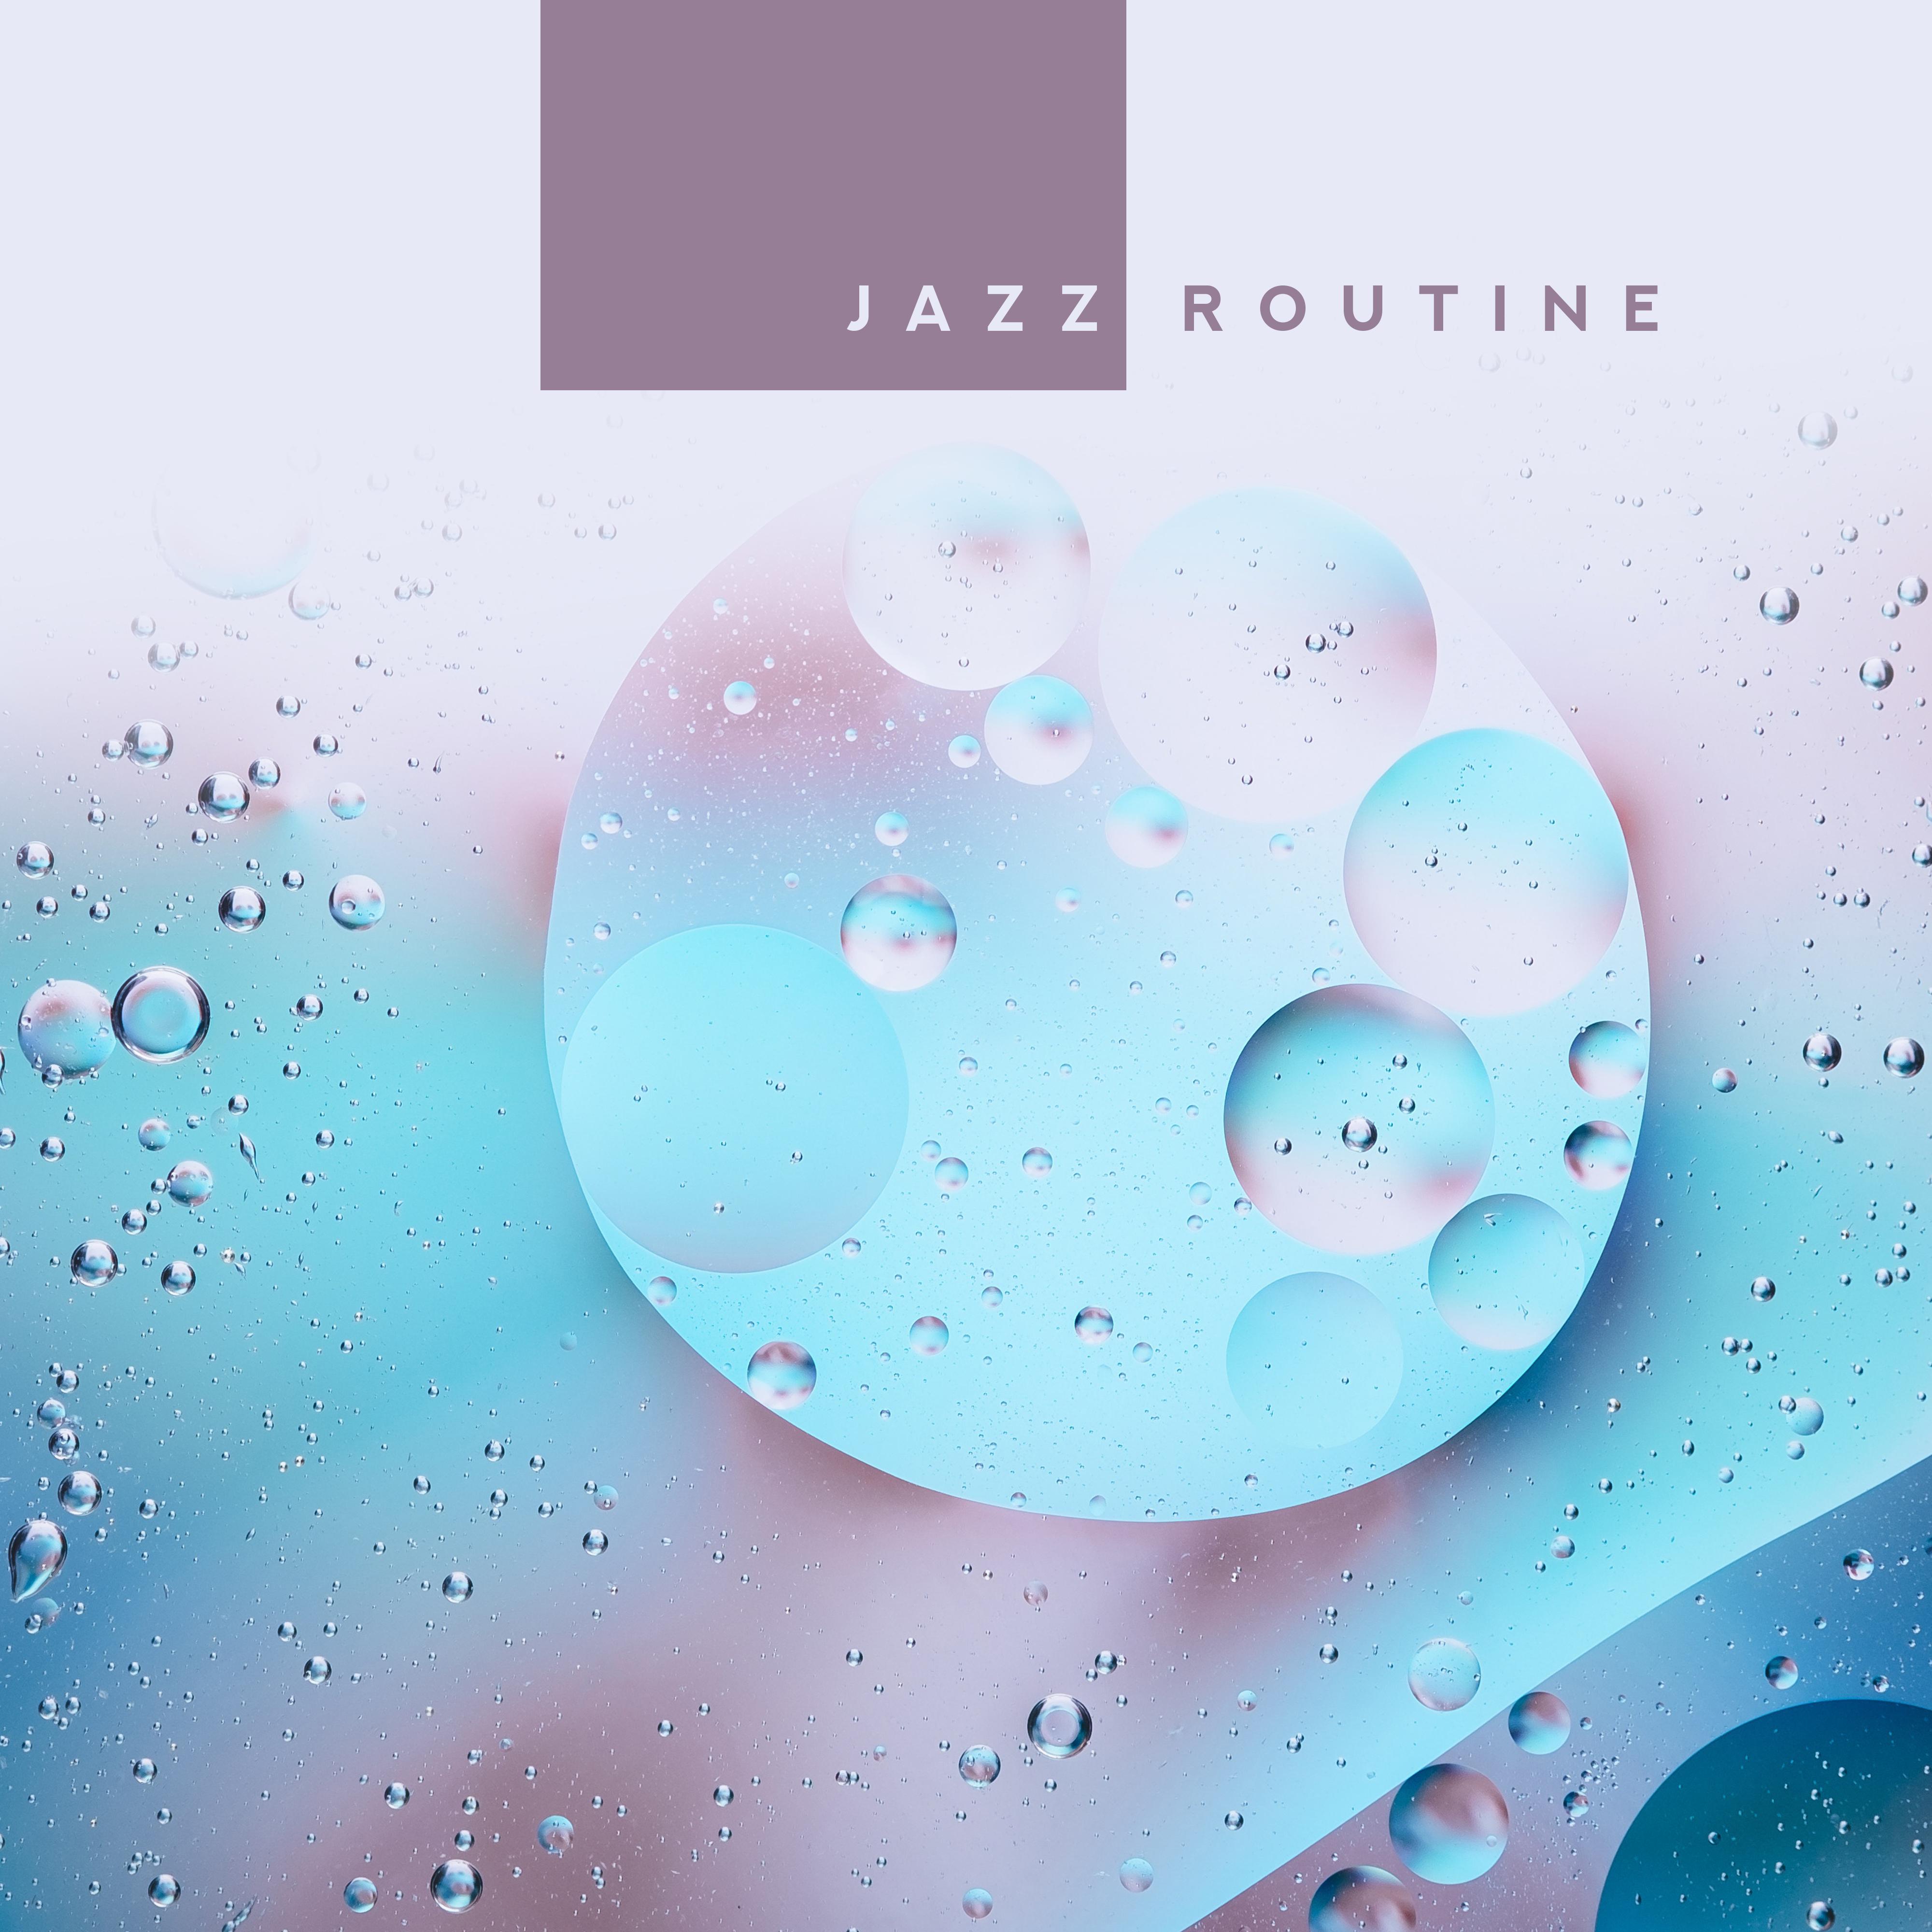 Jazz Routine: Music for Daily Duties and Pleasures, For Coffee, Work, Study or Rest